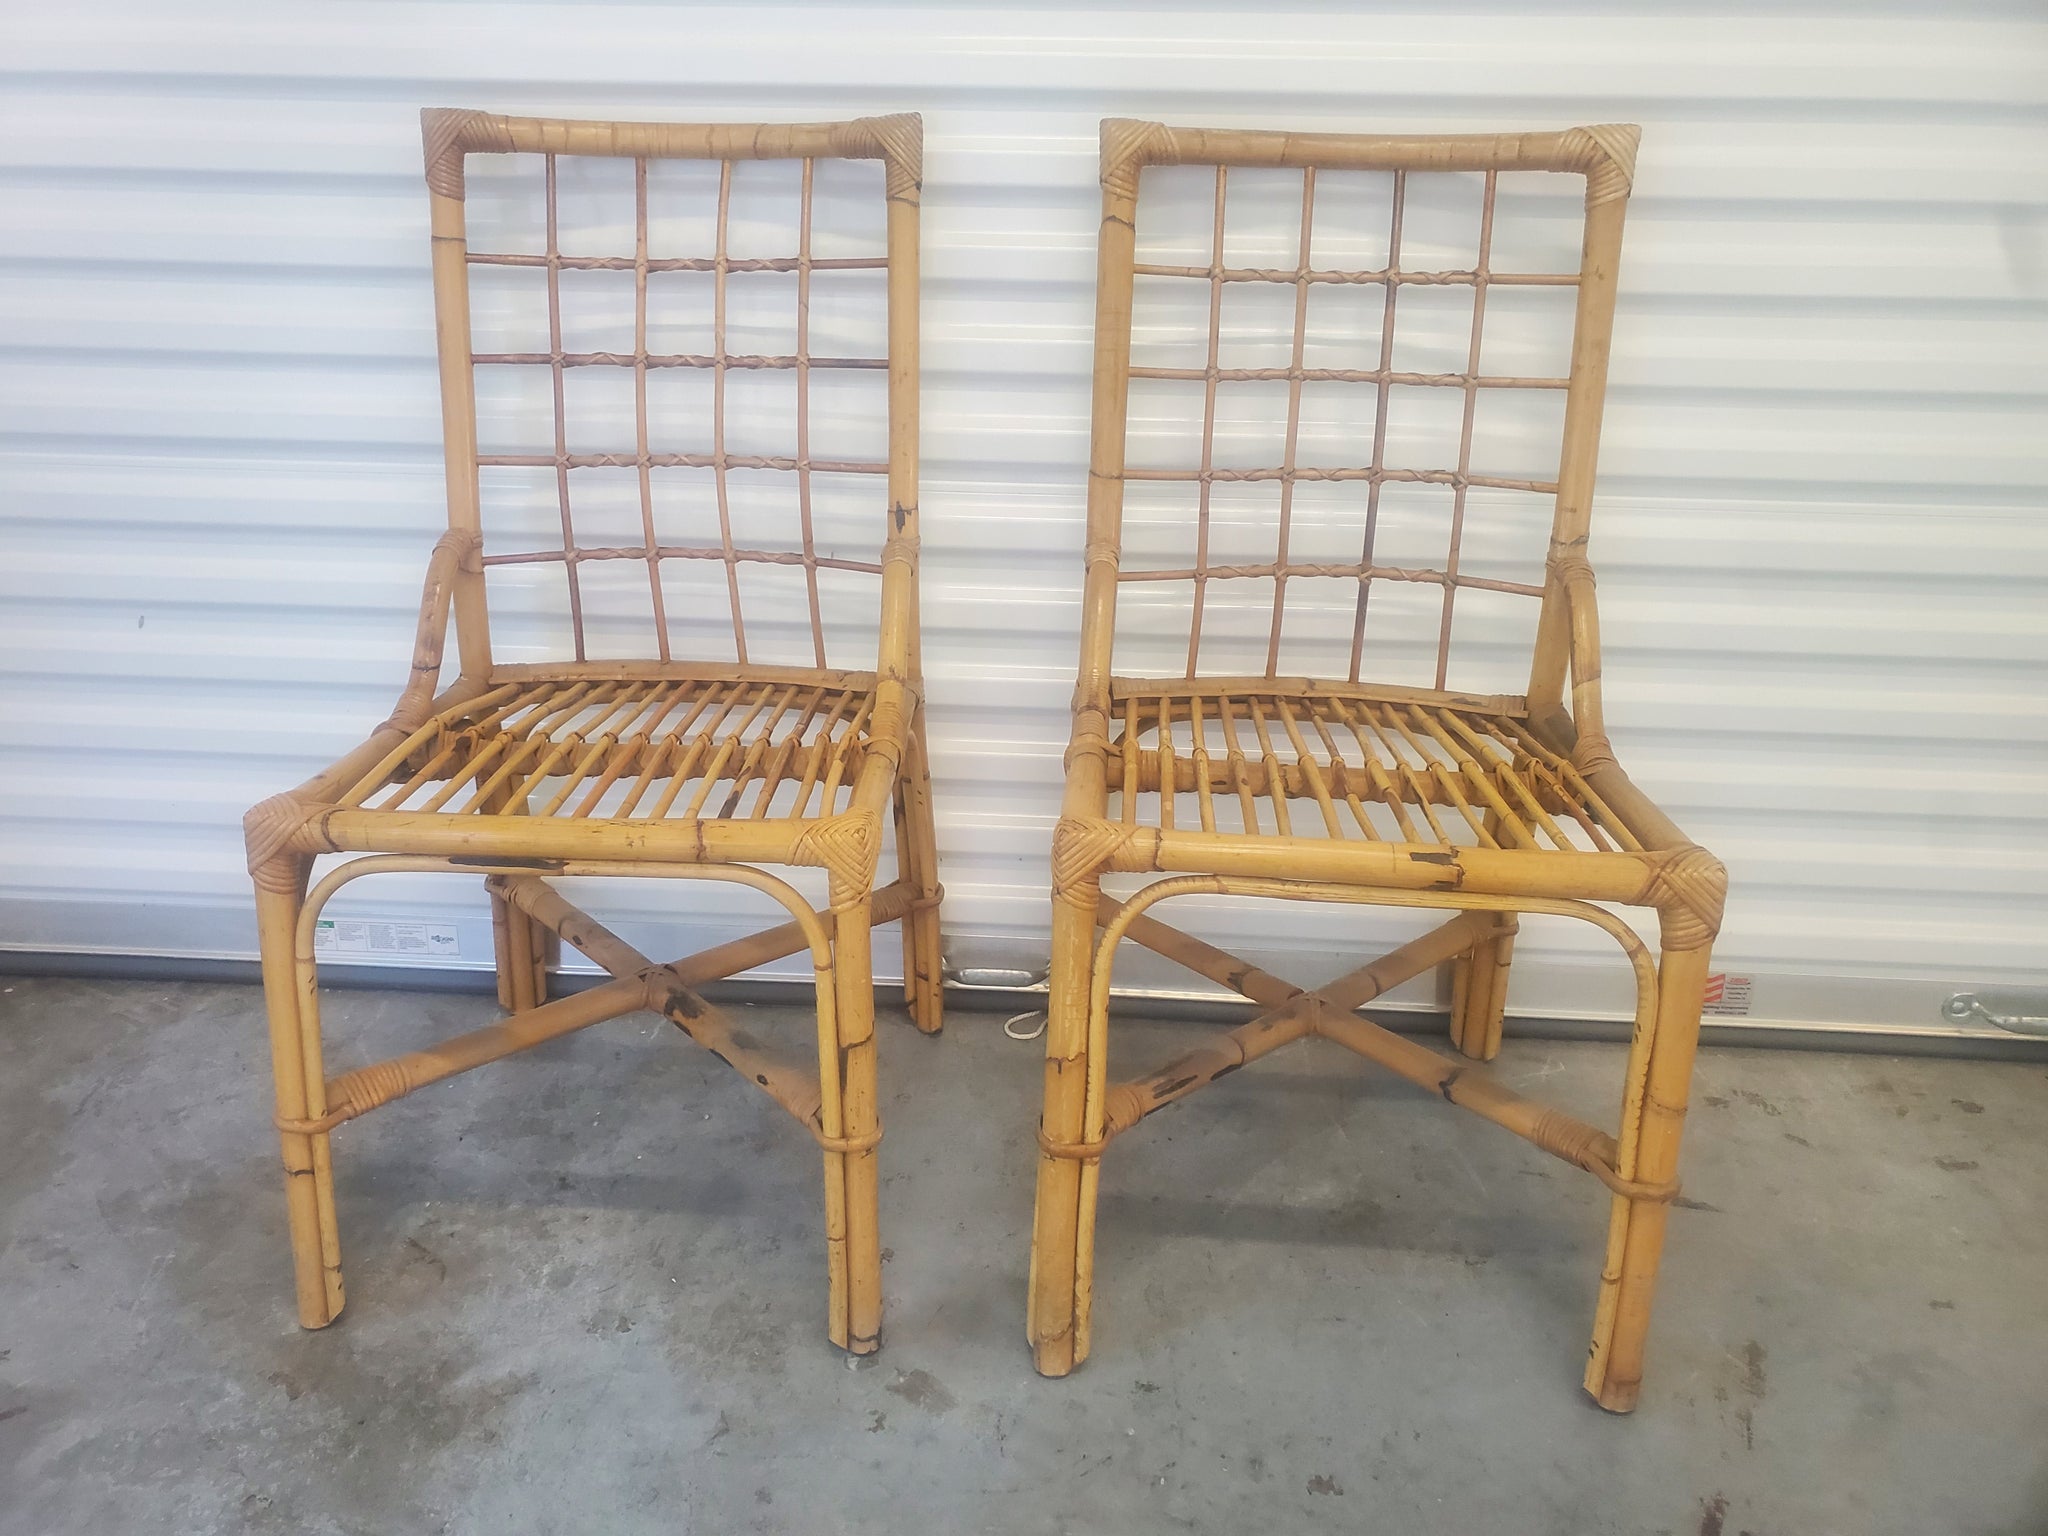 VINTAGE BAMBOO DESK/ DINING/ ACCENT CHAIRS (2 AVAILABLE)